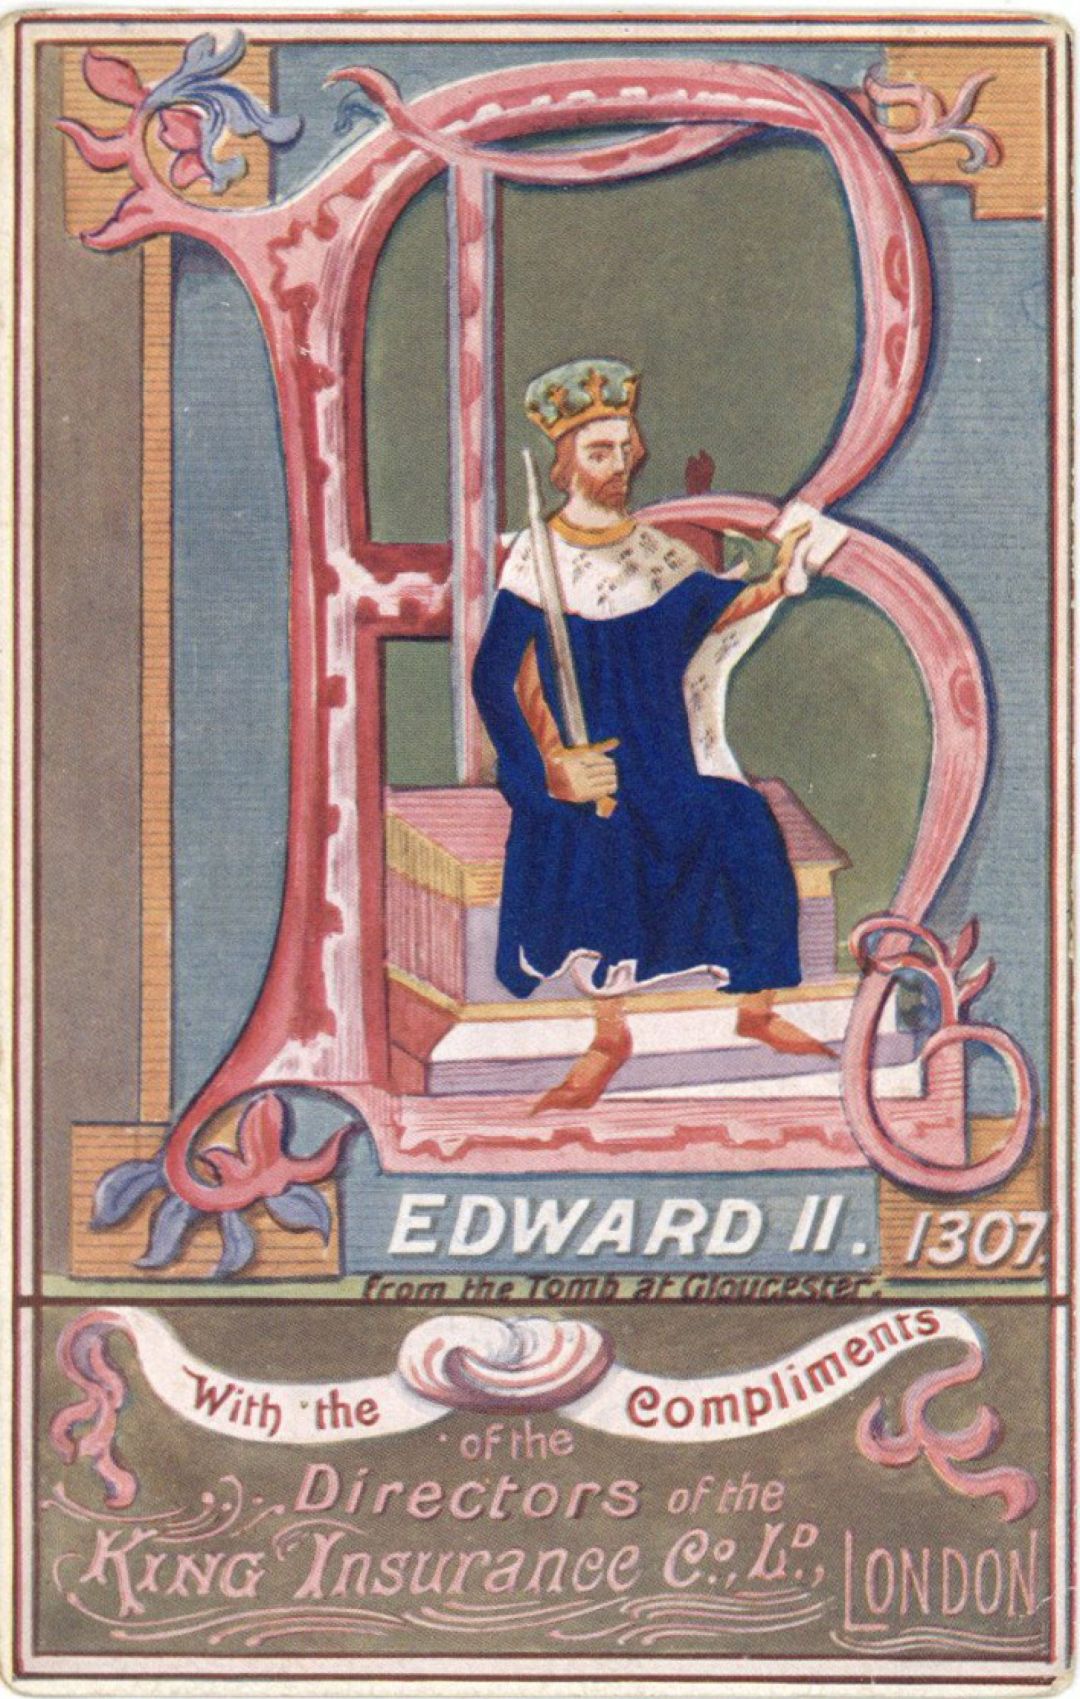 Post Card Ad for King Insurance Co. Ltd. dated 1307 -  Insurance